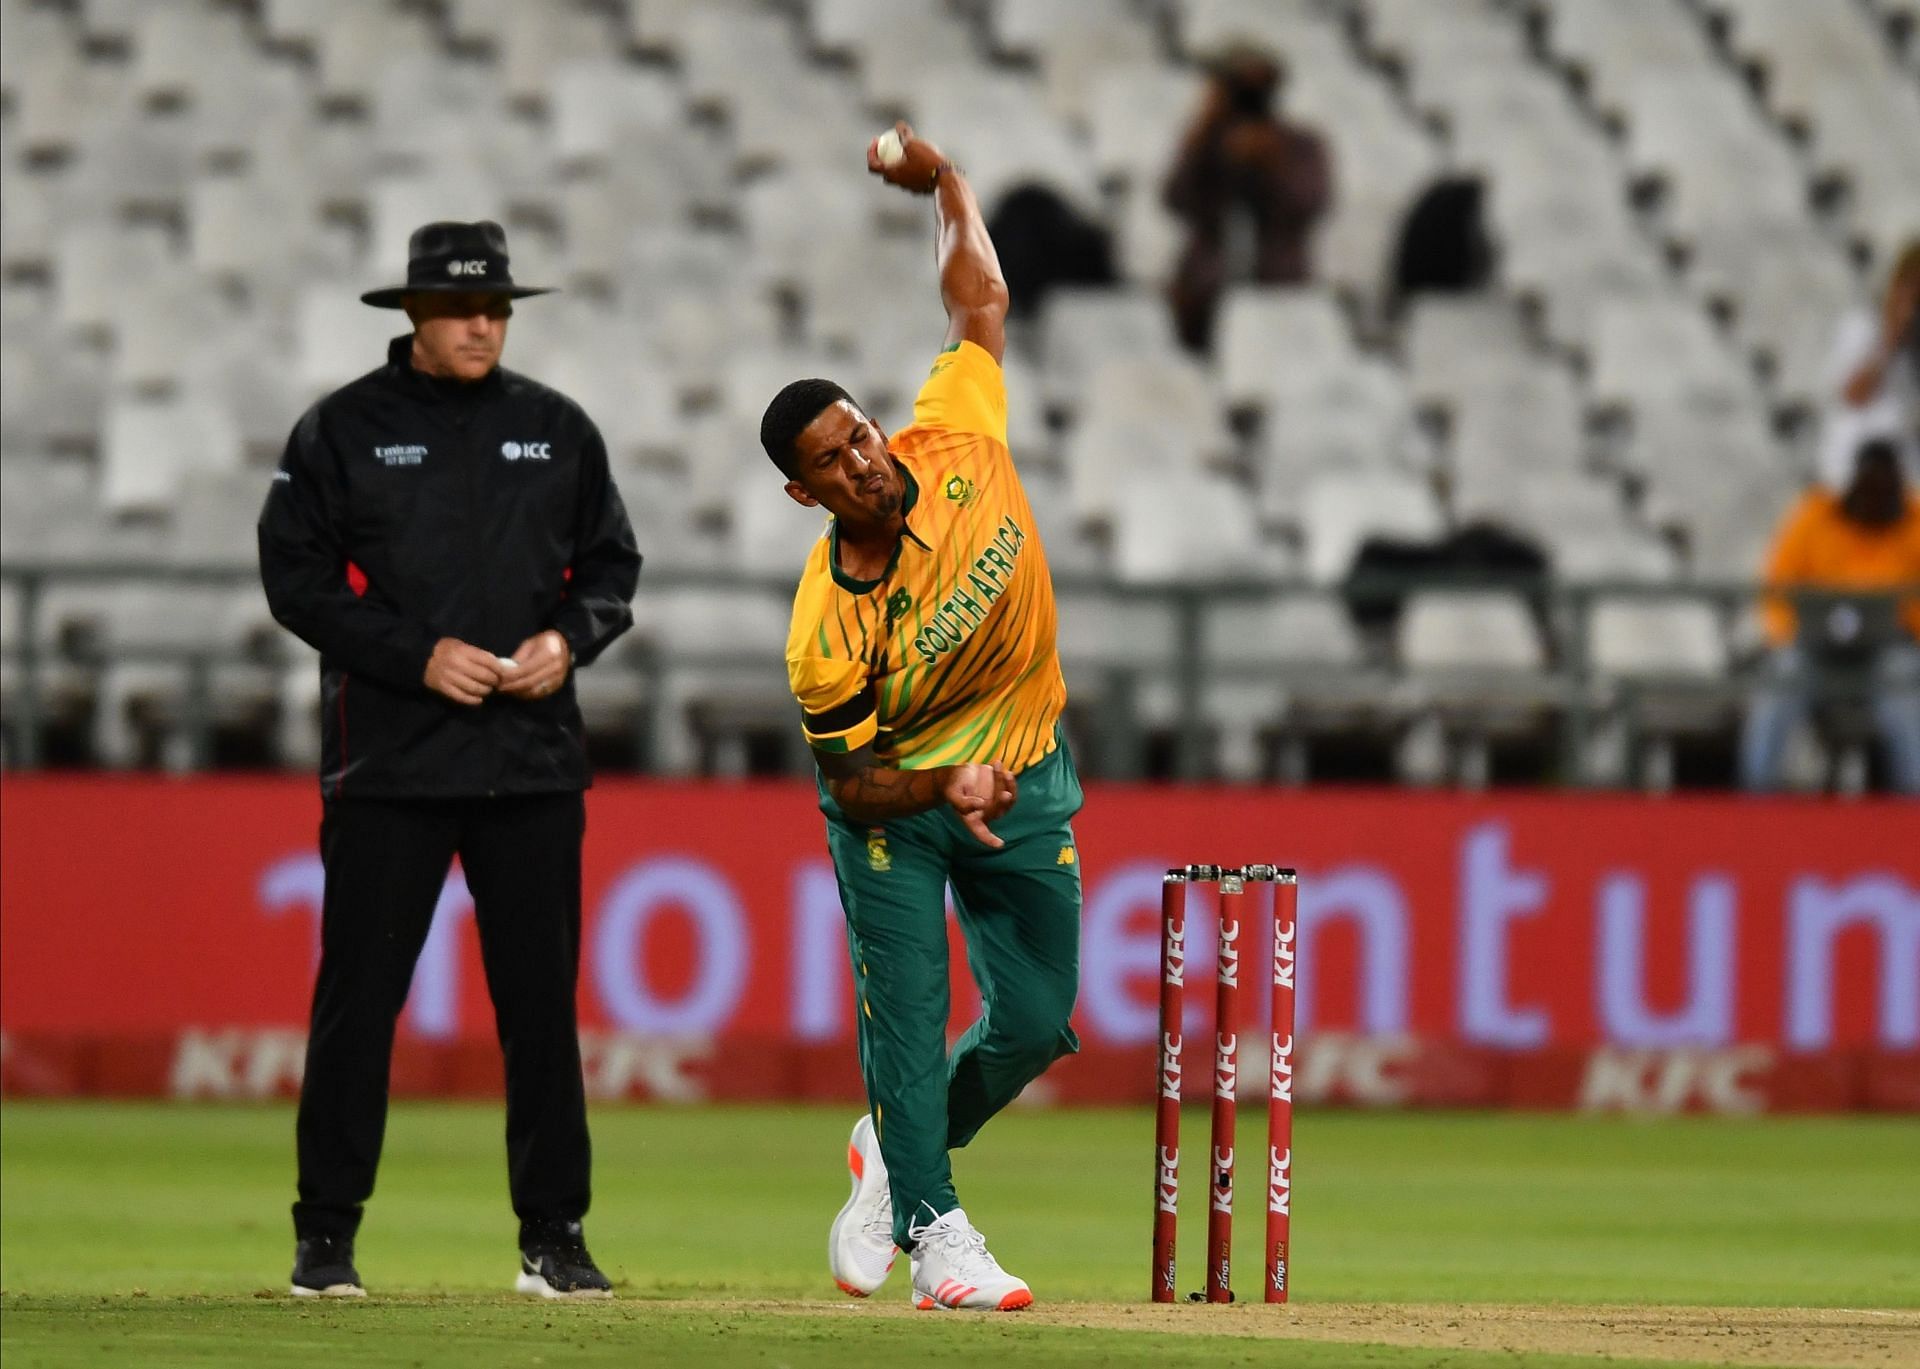 Beuran Hendricks bowling in a T20I match against England in 2020.